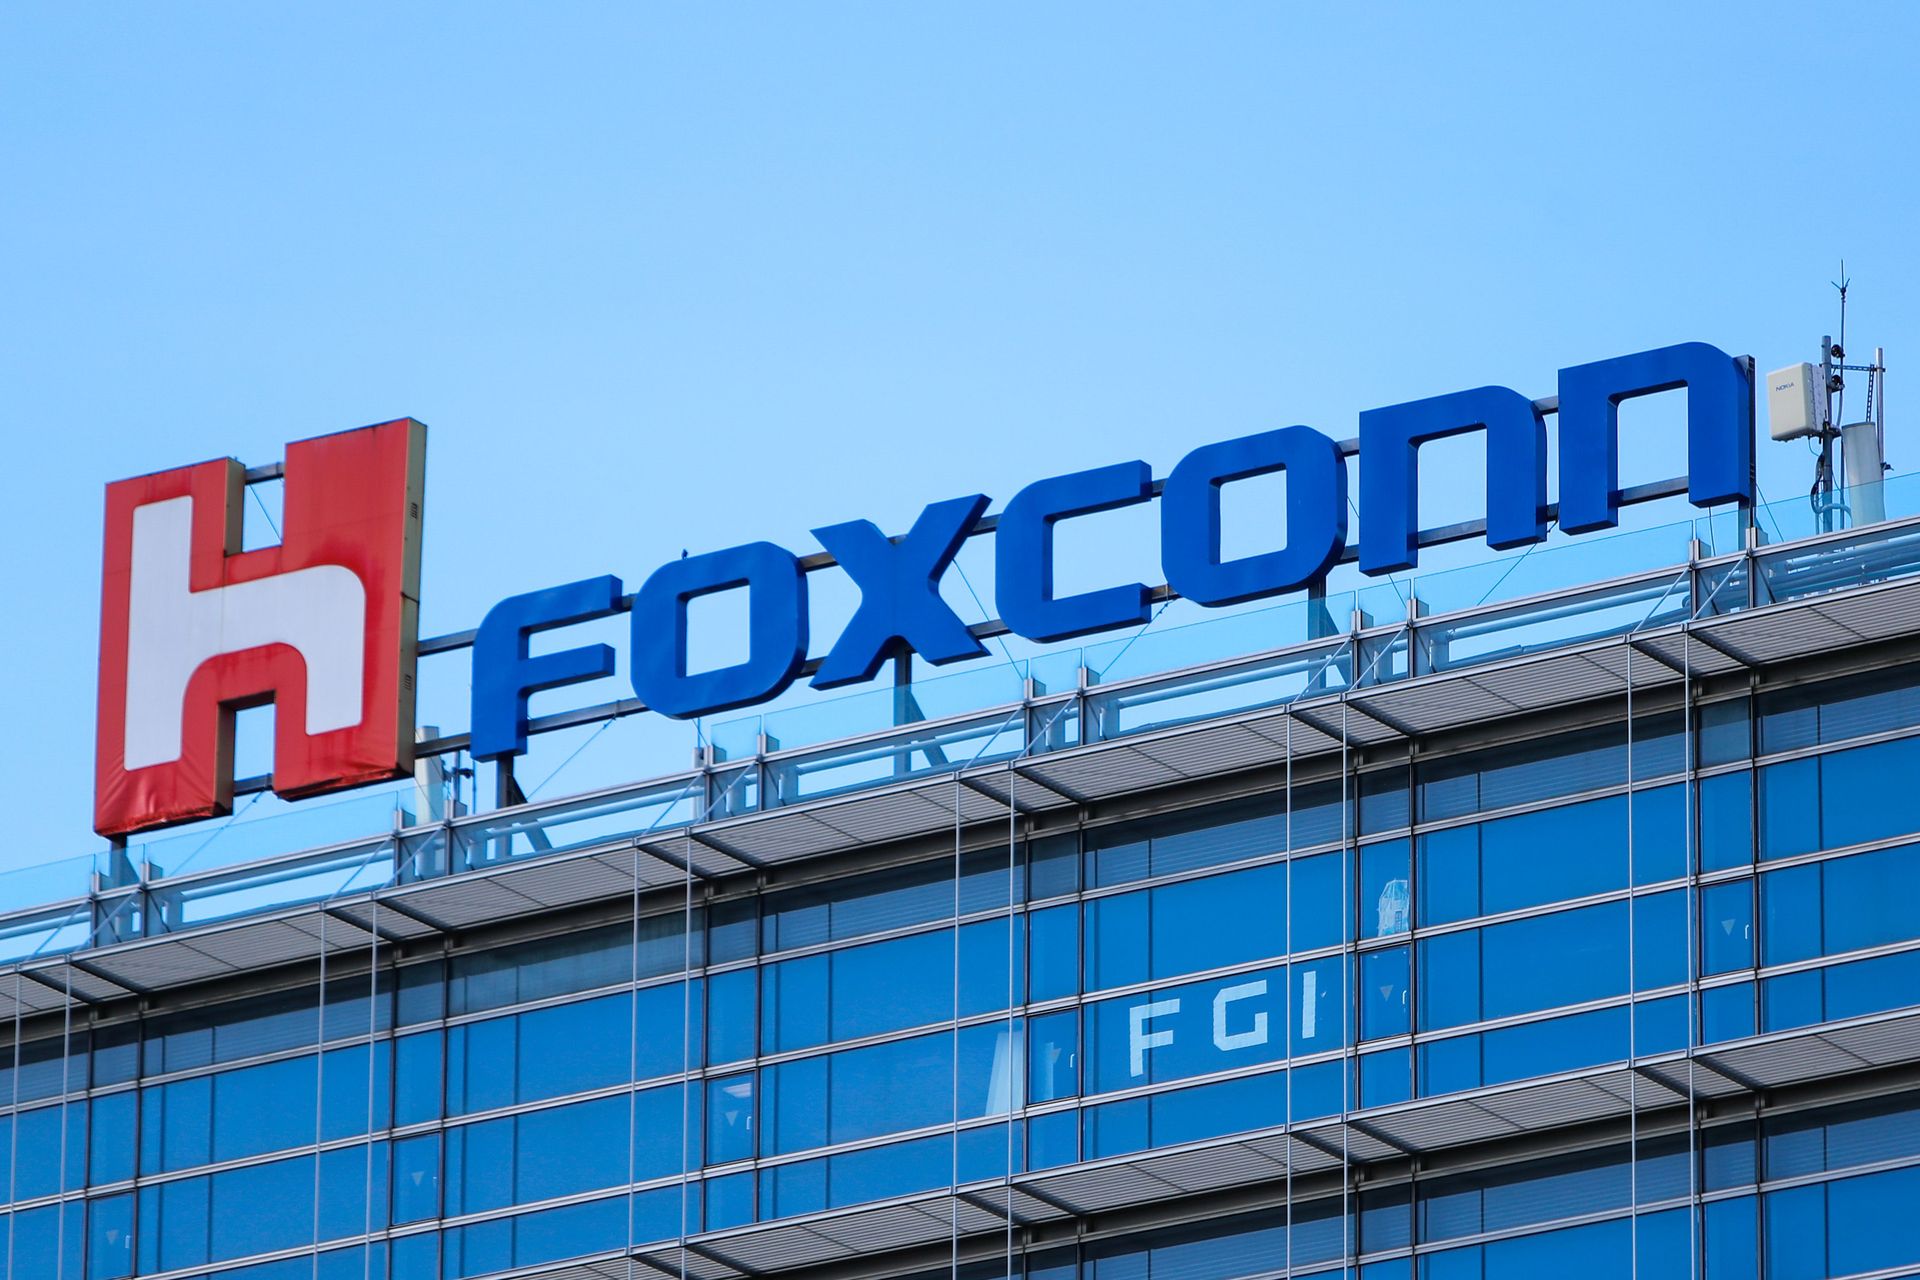 Protests in the Foxconn factory are the core reason Apple moving out of China